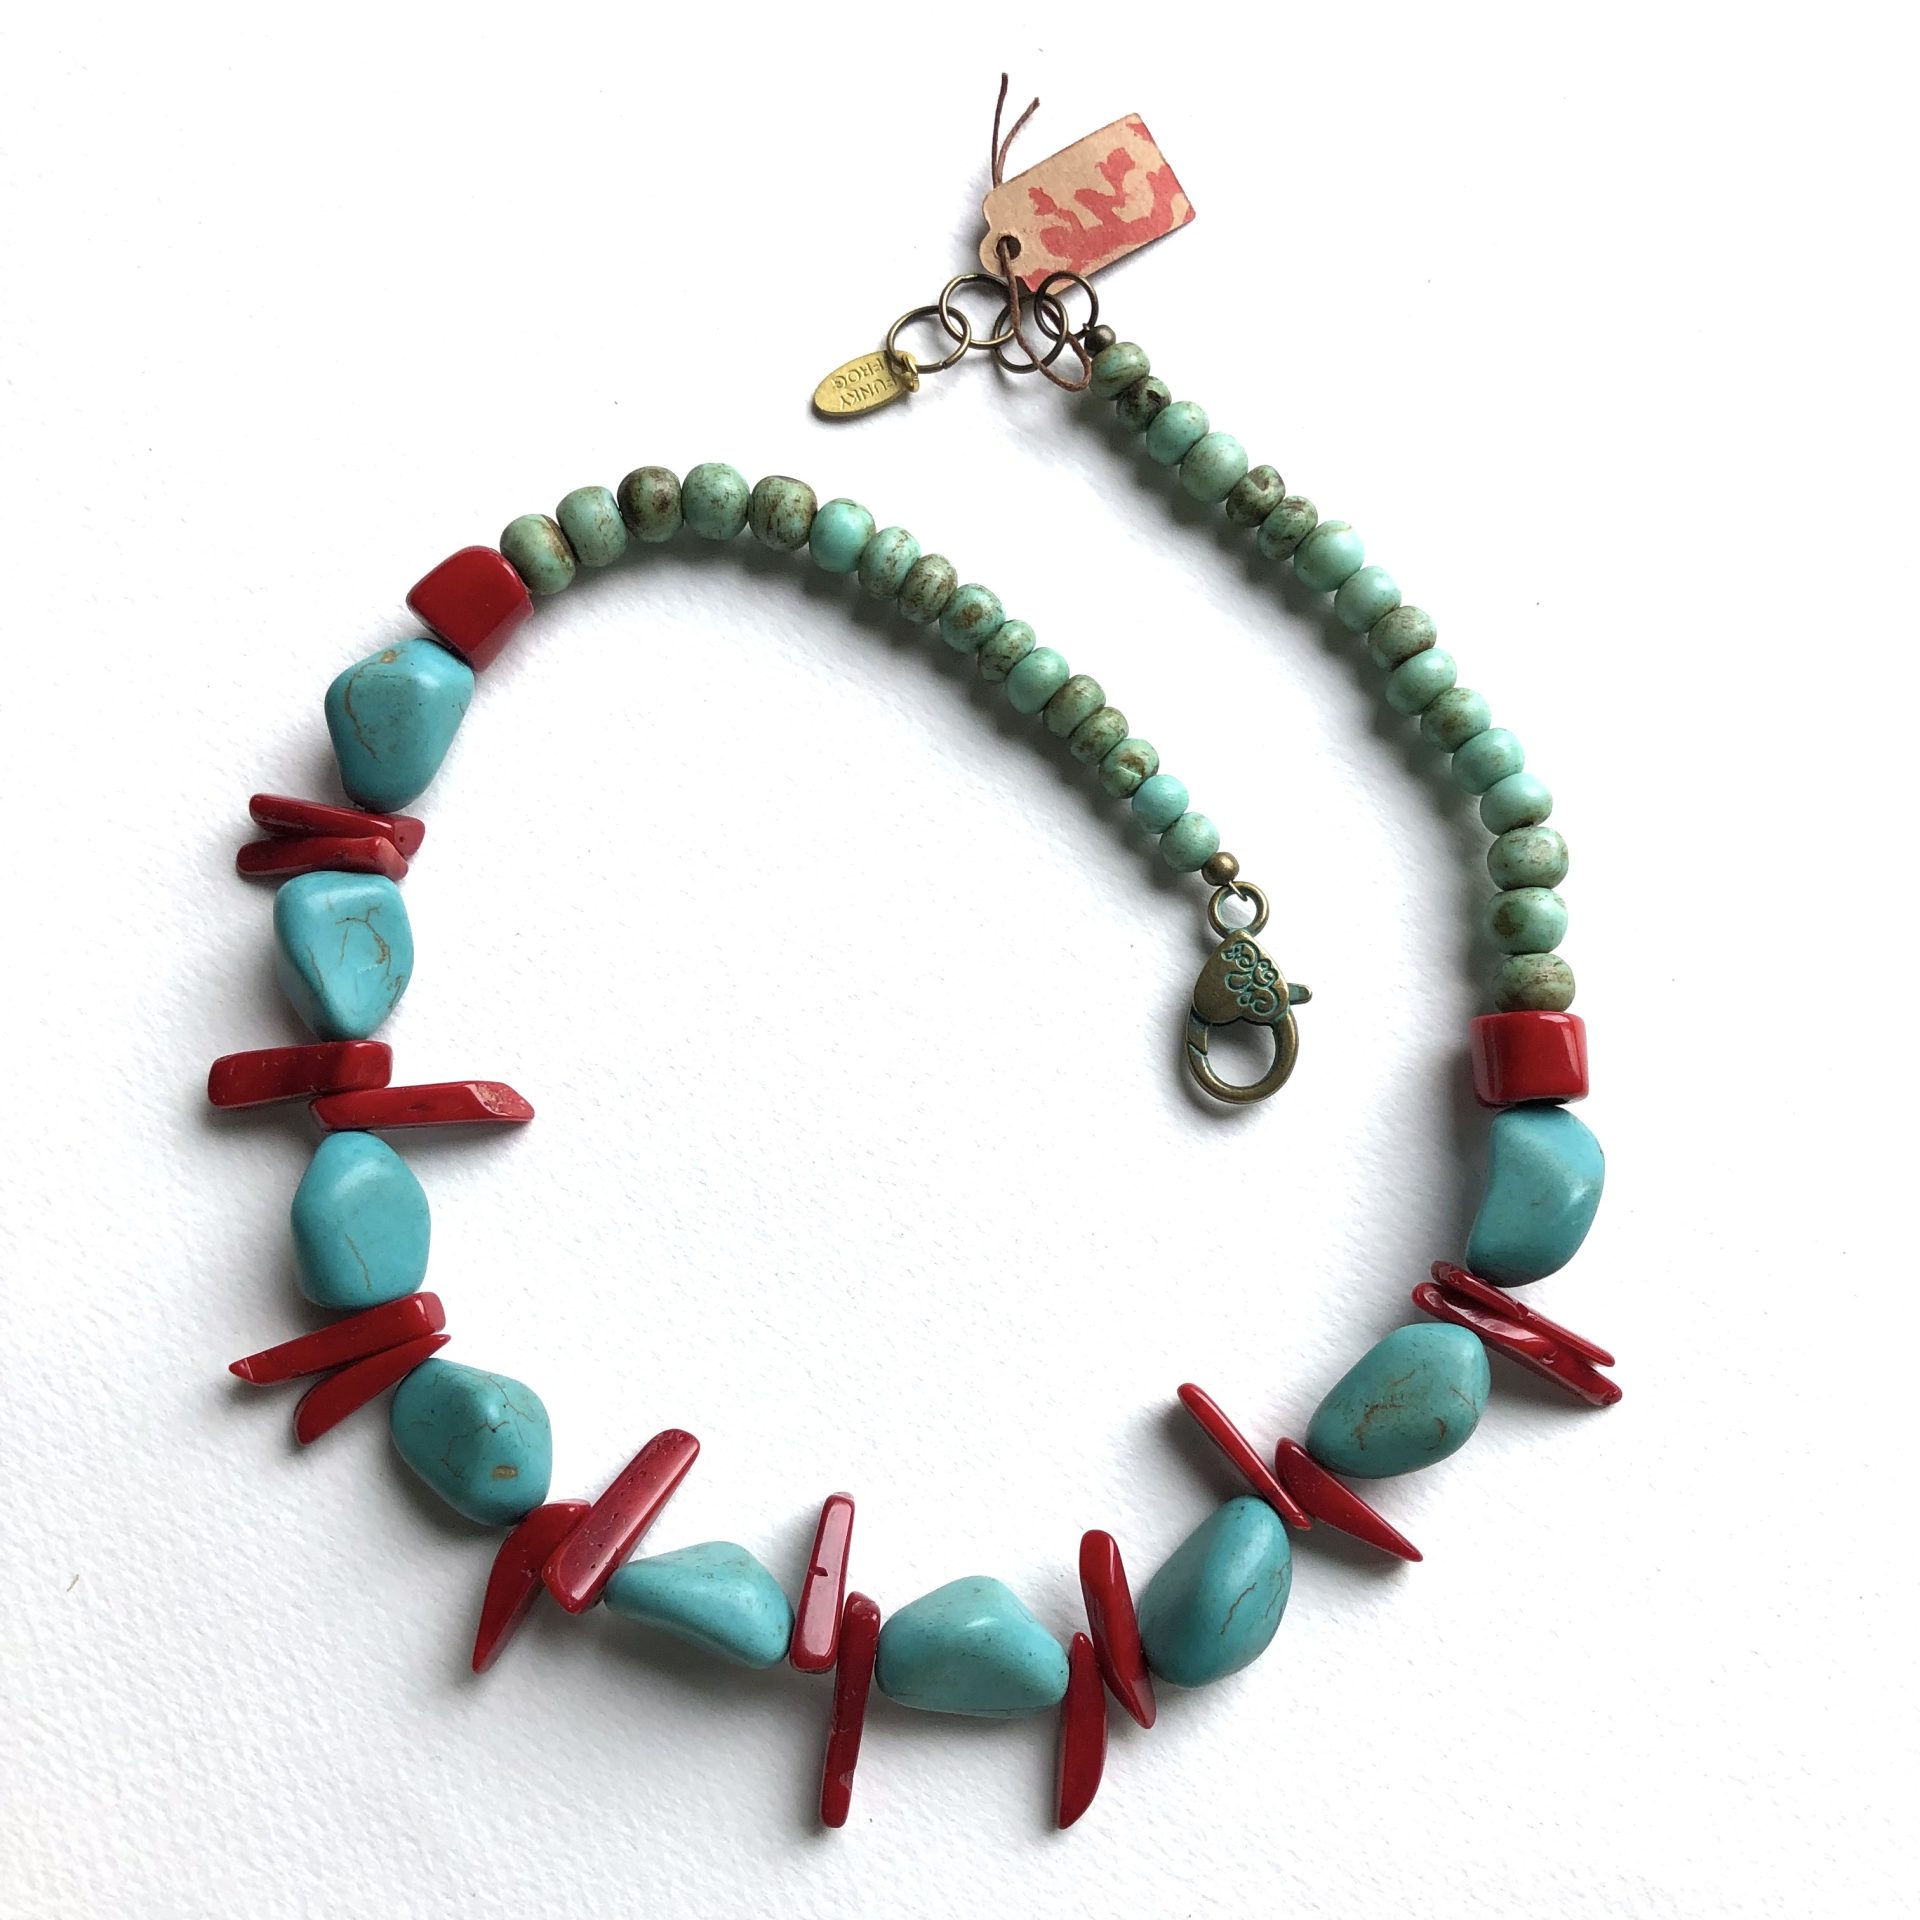 Turquoise + Coral Beads Necklace